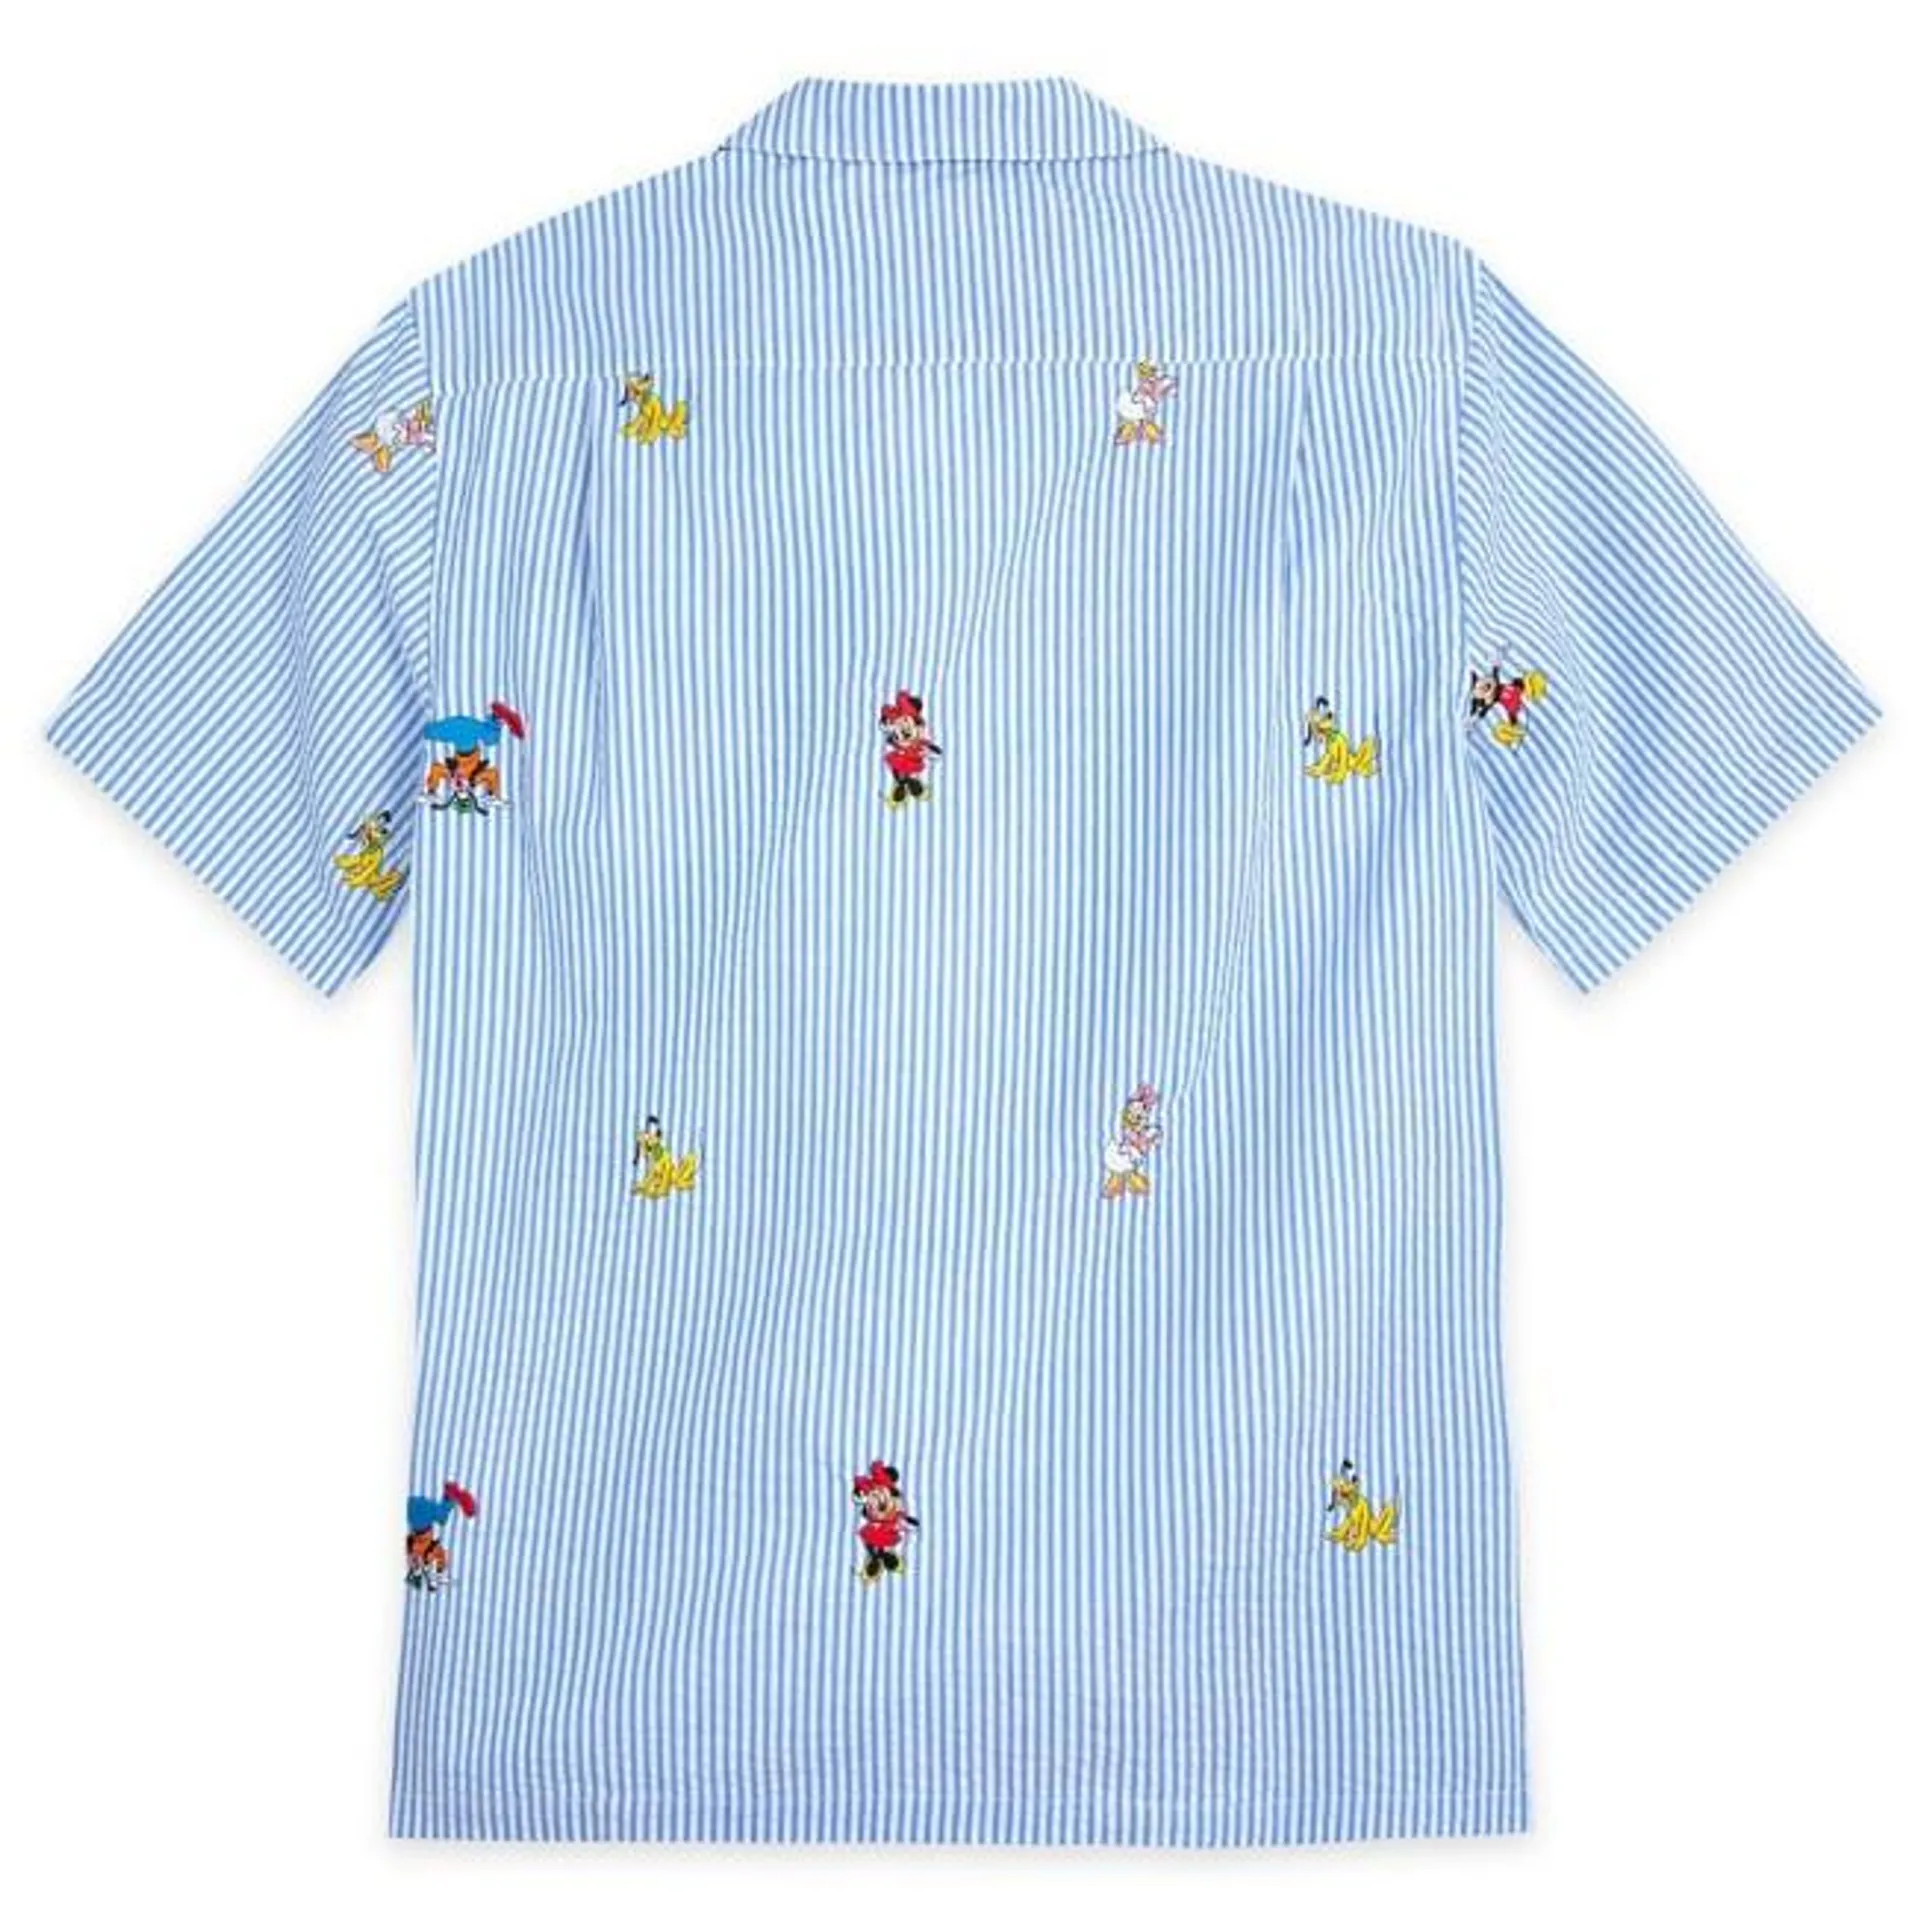 Mickey Mouse and Friends Woven Striped Shirt for Adults